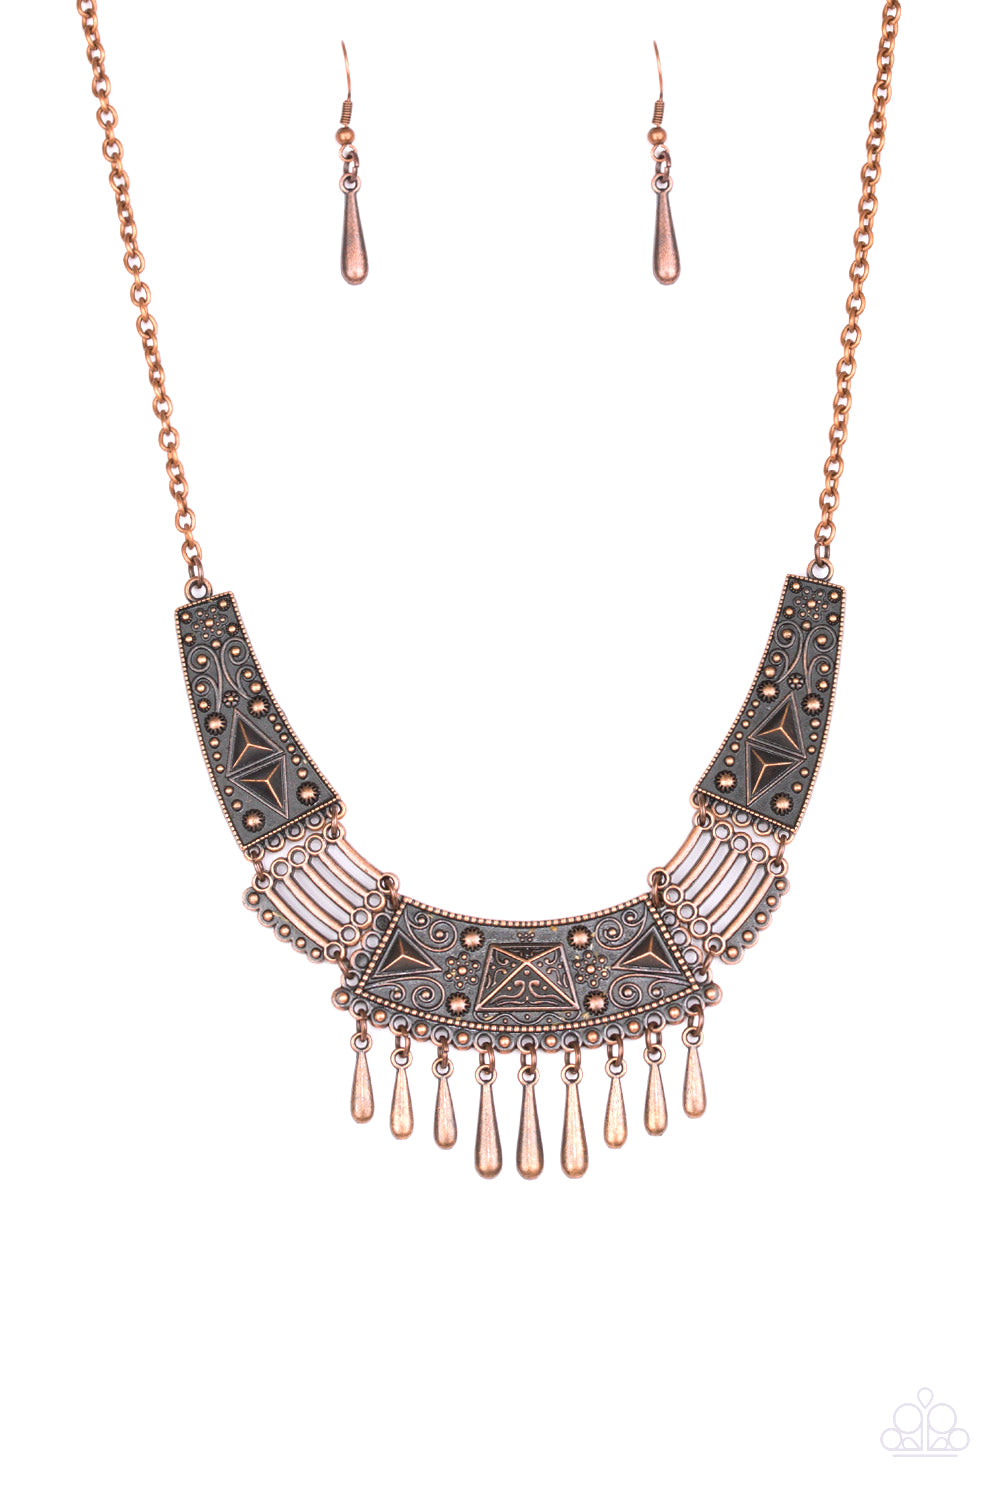 Paparazzi Accessories - STEER It Up - Copper Necklace - Alies Bling Bar